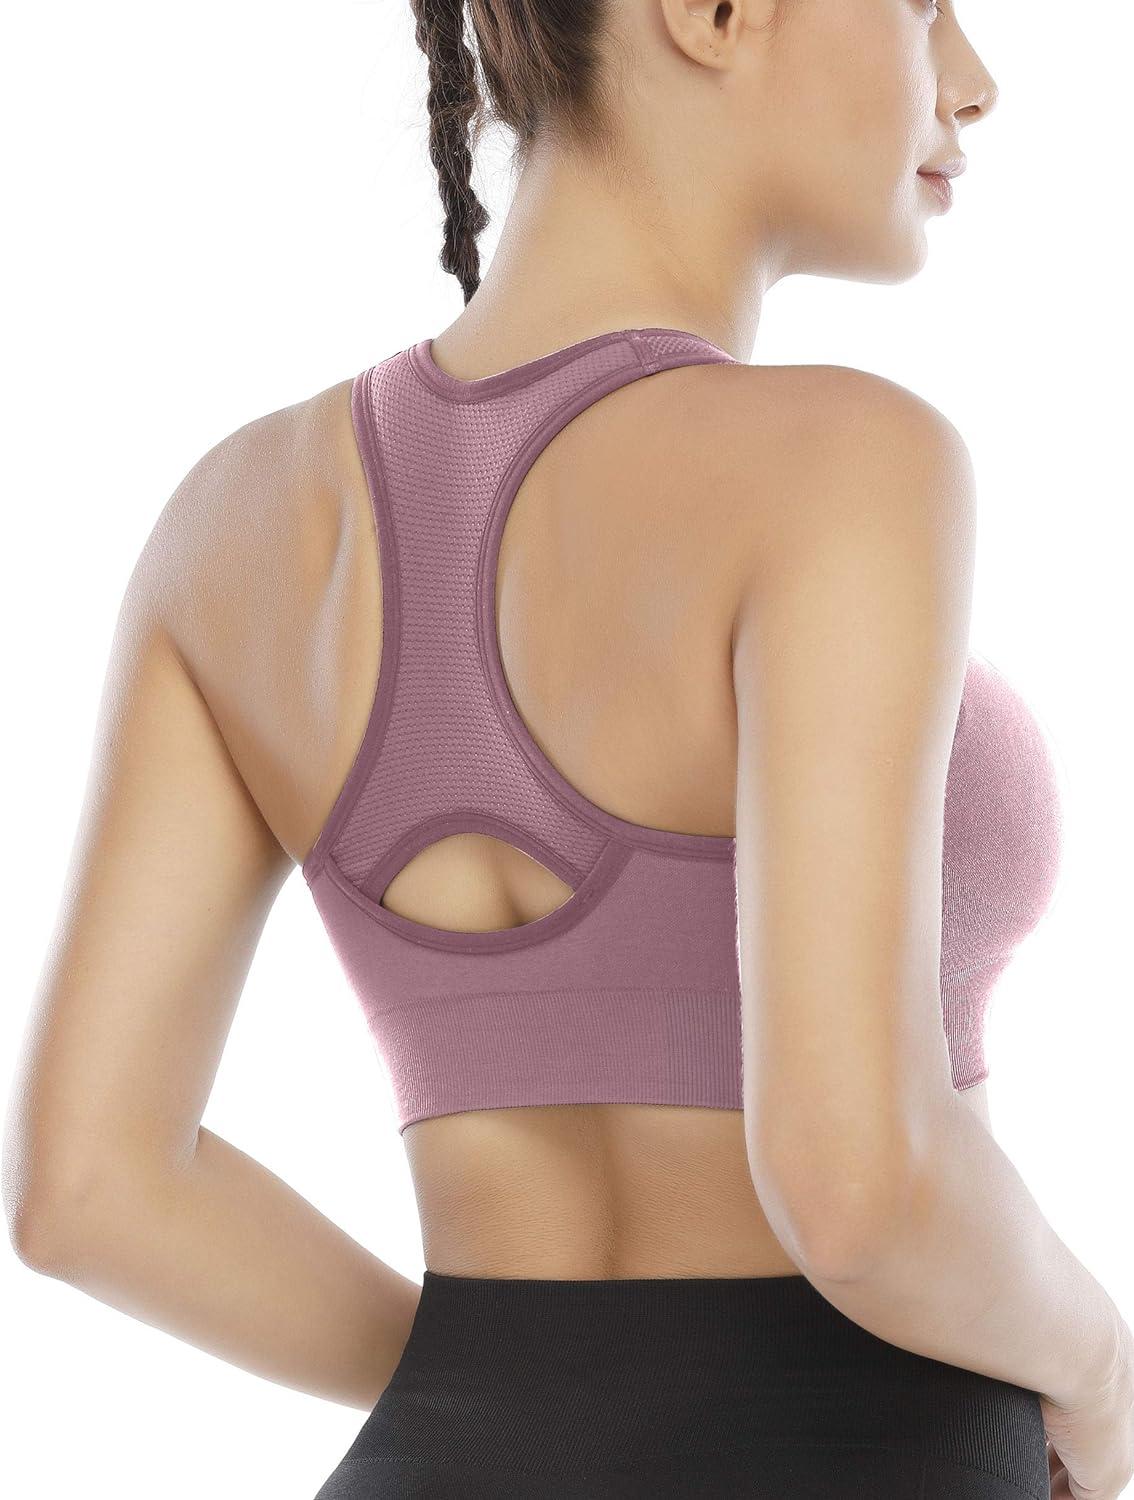  High Impact Sports Bras For Women Padded Sports